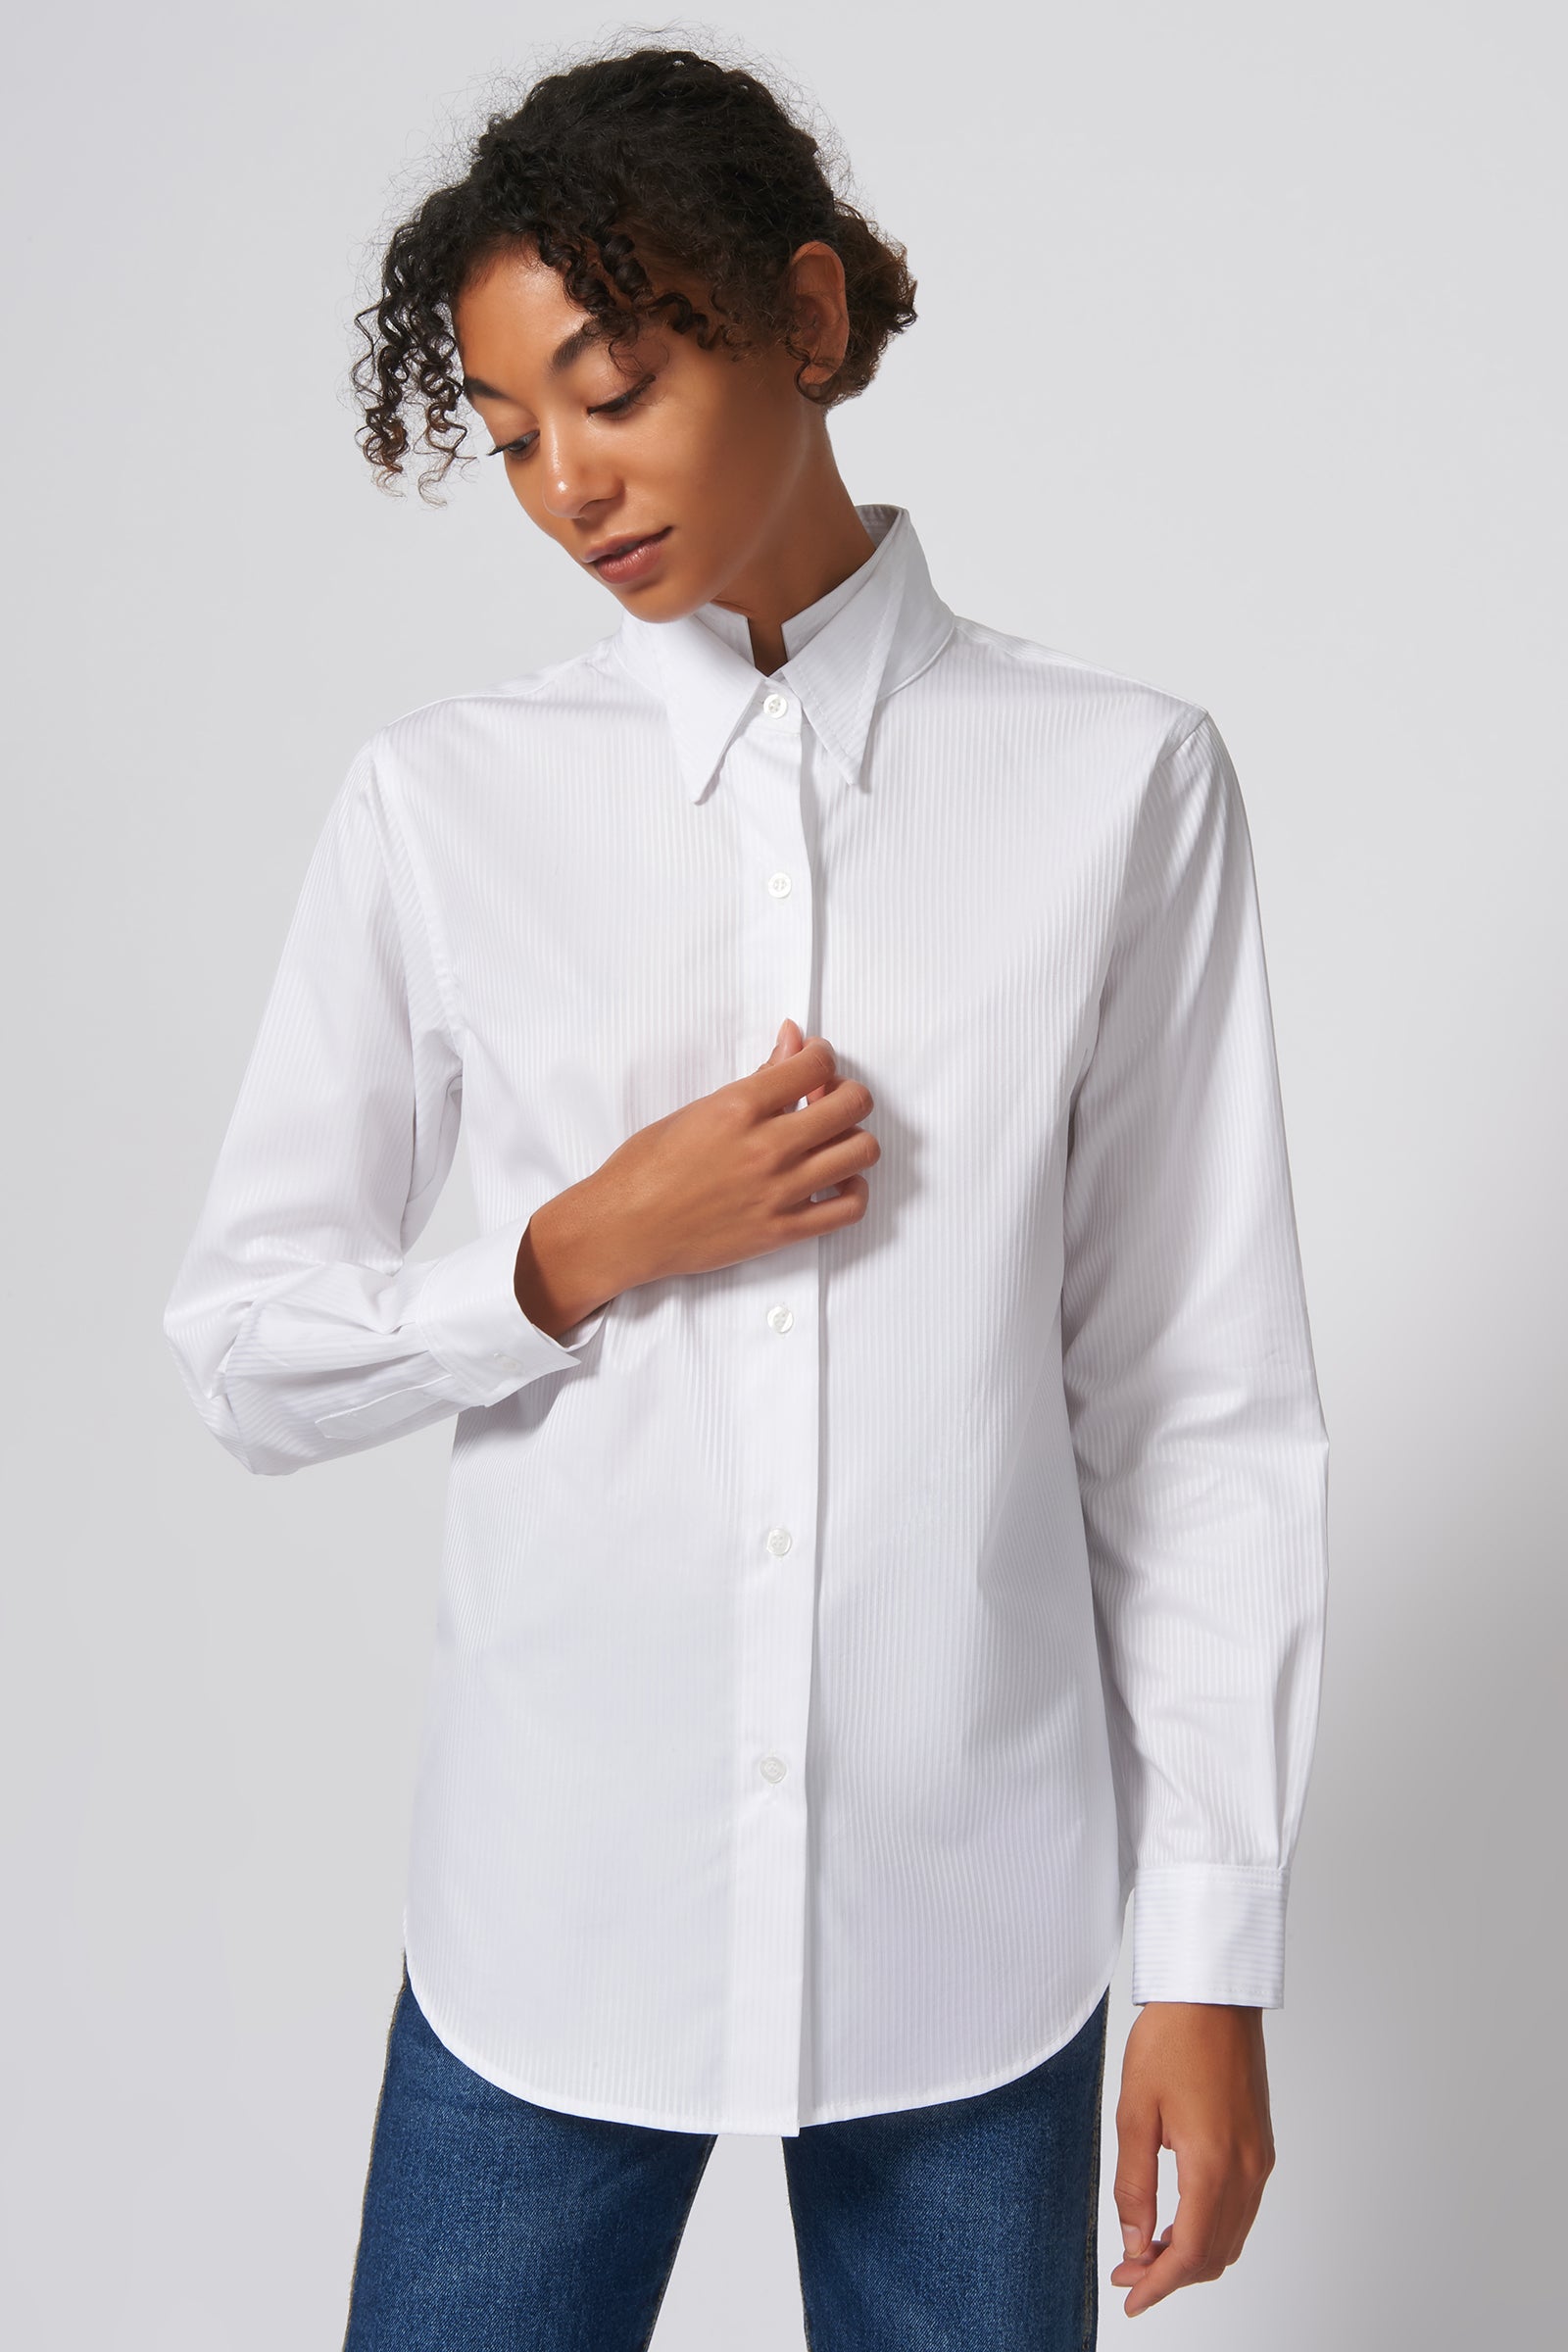 Double Collar Shirt in White Satin Stripe Made From 100% Cotton 